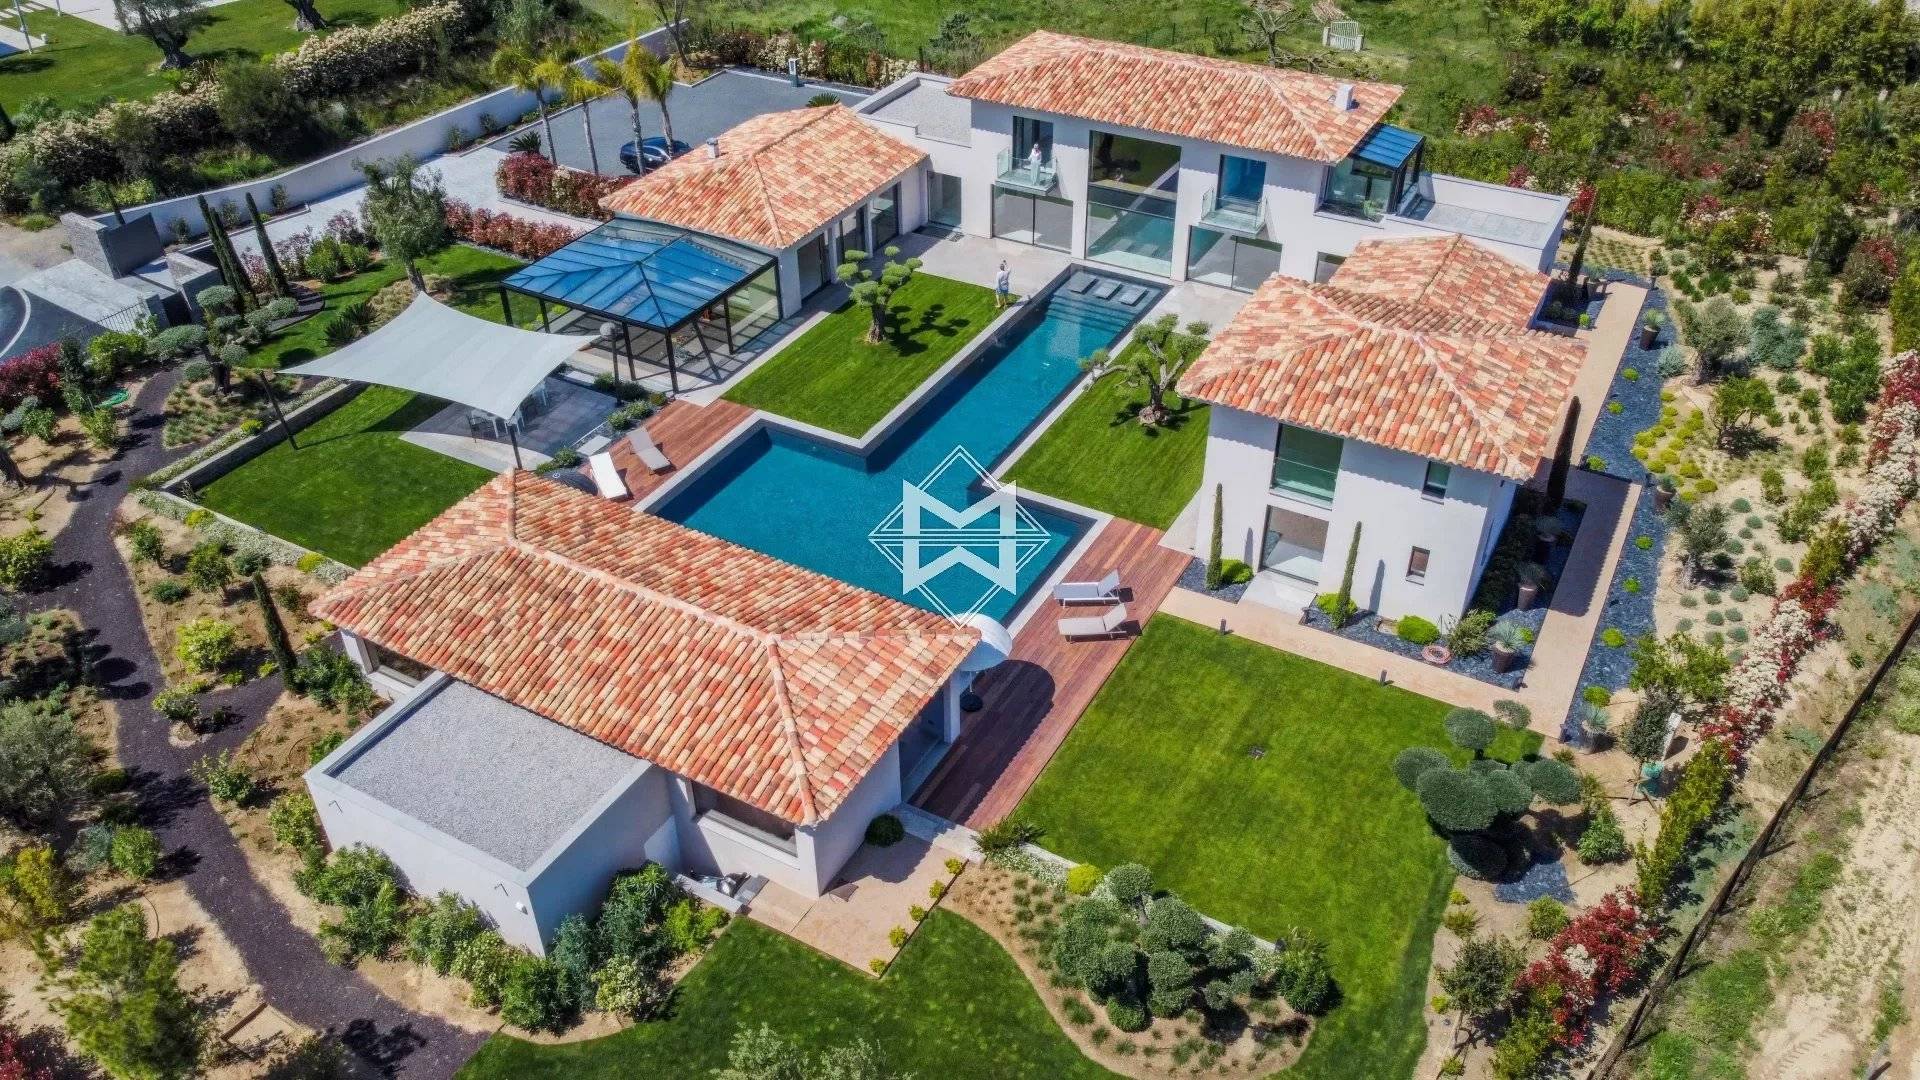 Newly built property, close to the center of Saint-Tropez